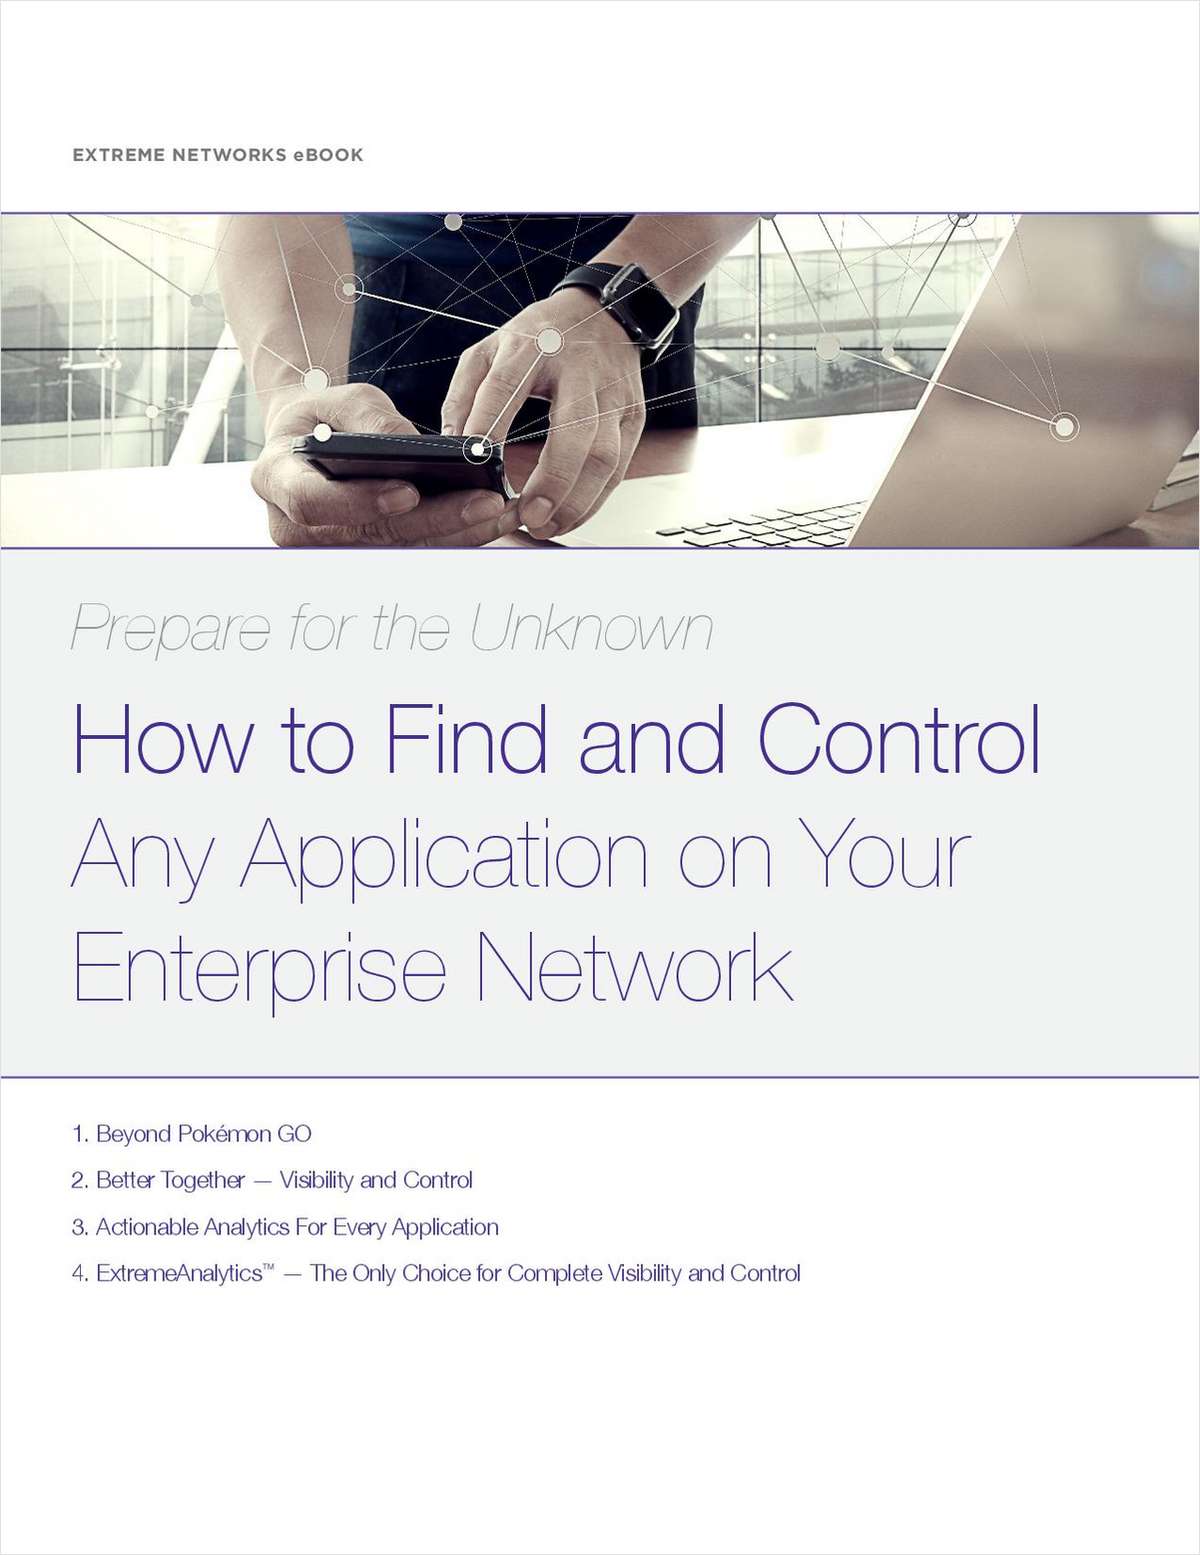 Prepare for the Unknown: How to Find and Control Any Application on Your Enterprise Network